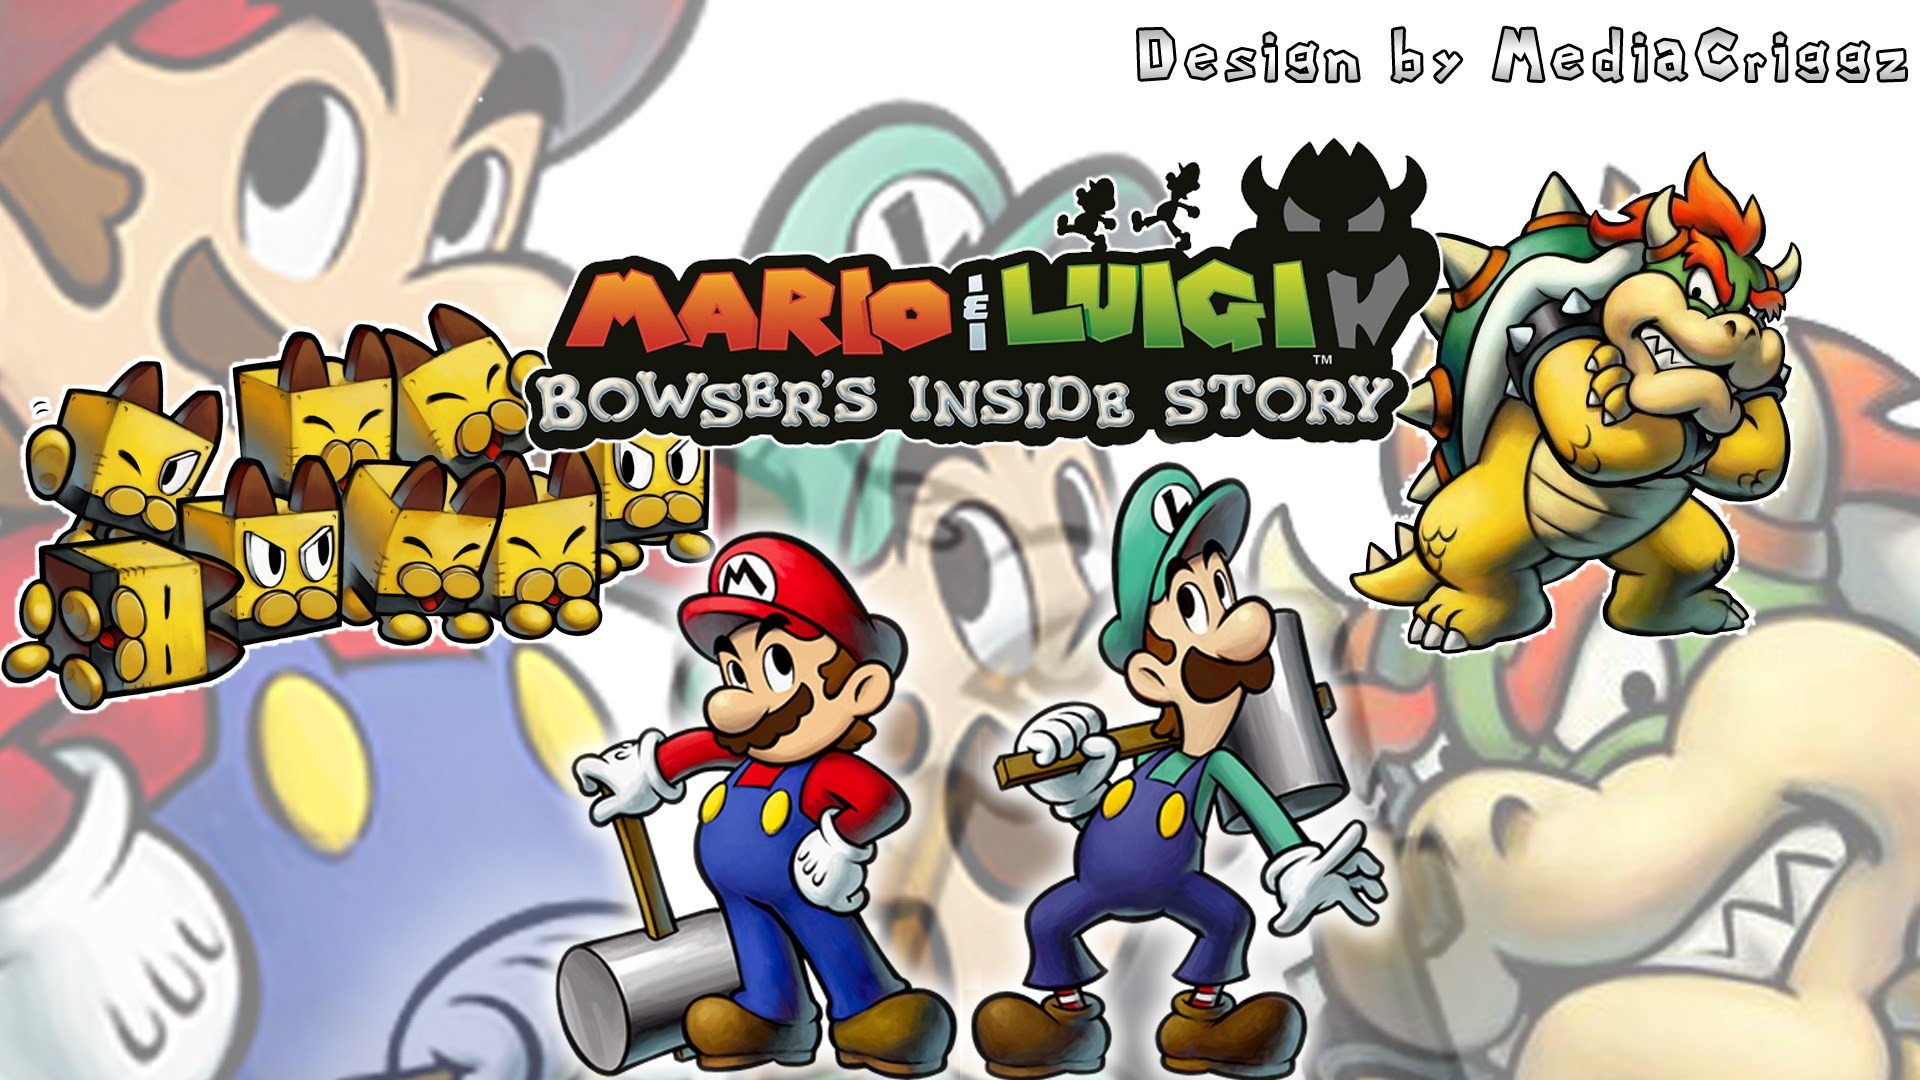 mario and luigi bowsers inside story free desktop wallpaper by Harvey Grant  (2017-03